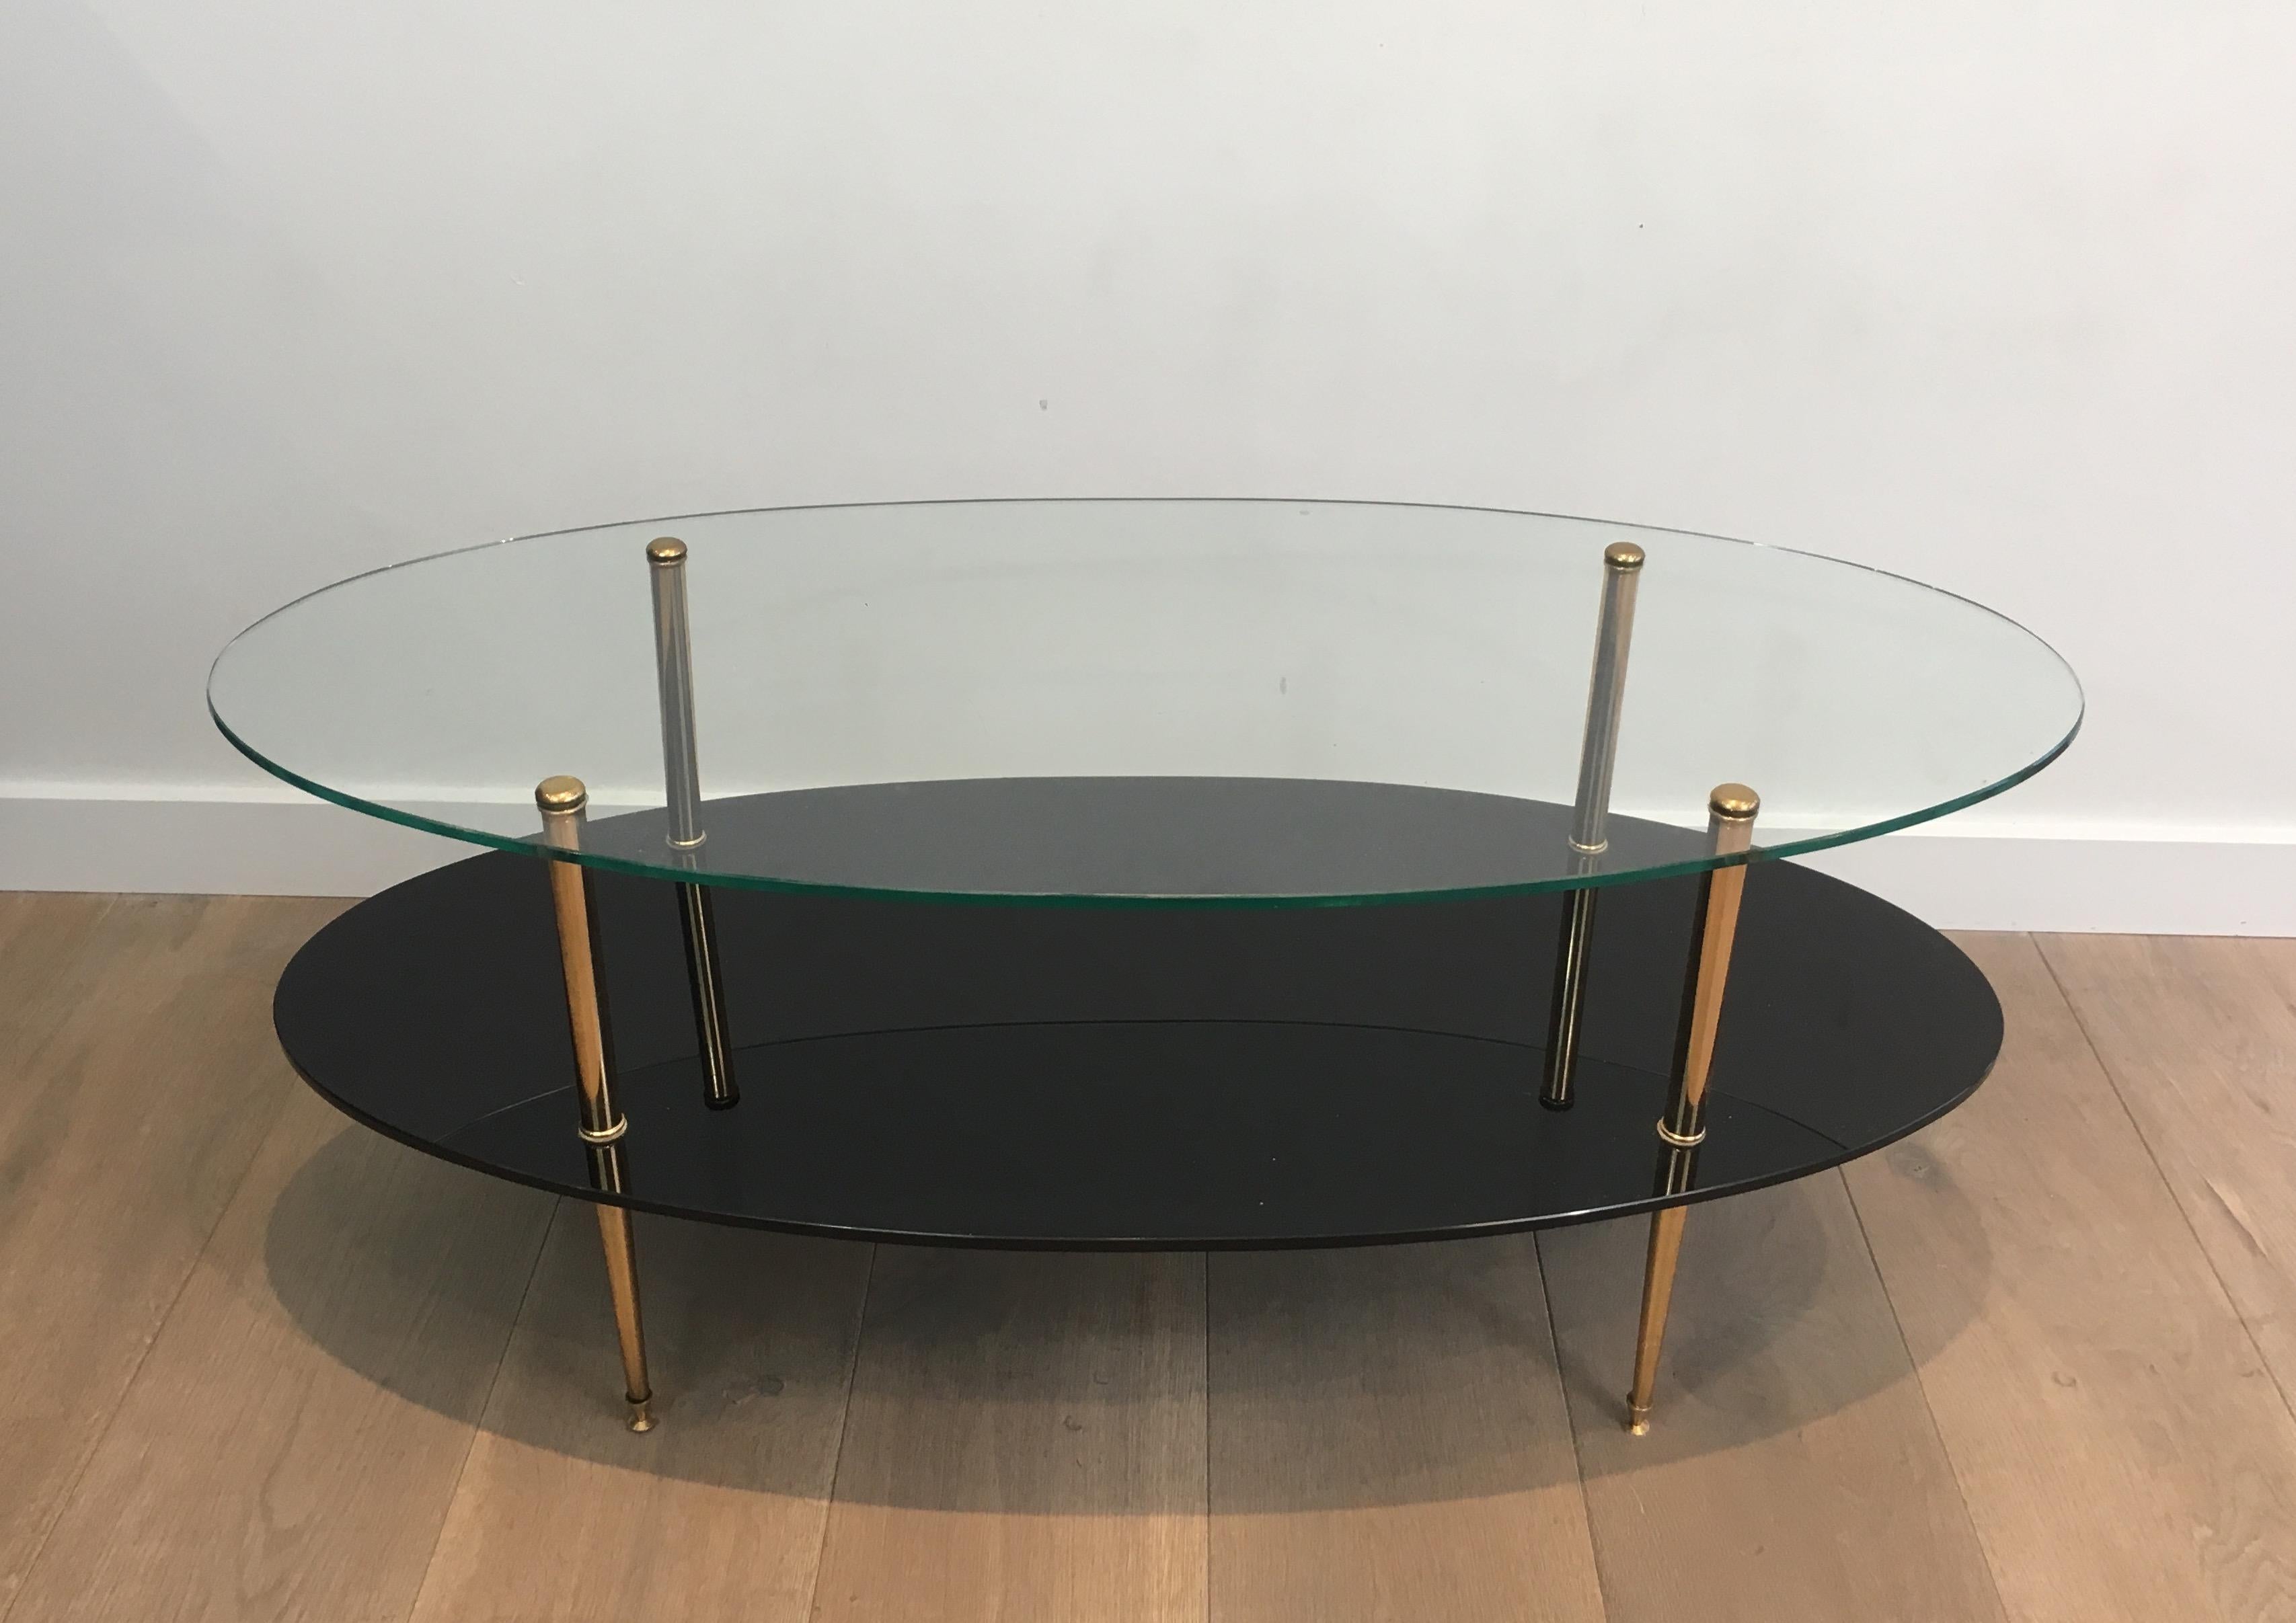 This design oval coffee table has a clear glass as top shelf and a black lacquered glass as bottom shelf. The feet are made of brass and both shelves are linked by these simple brass feet on top of which is a round brass finial. This cocktail table